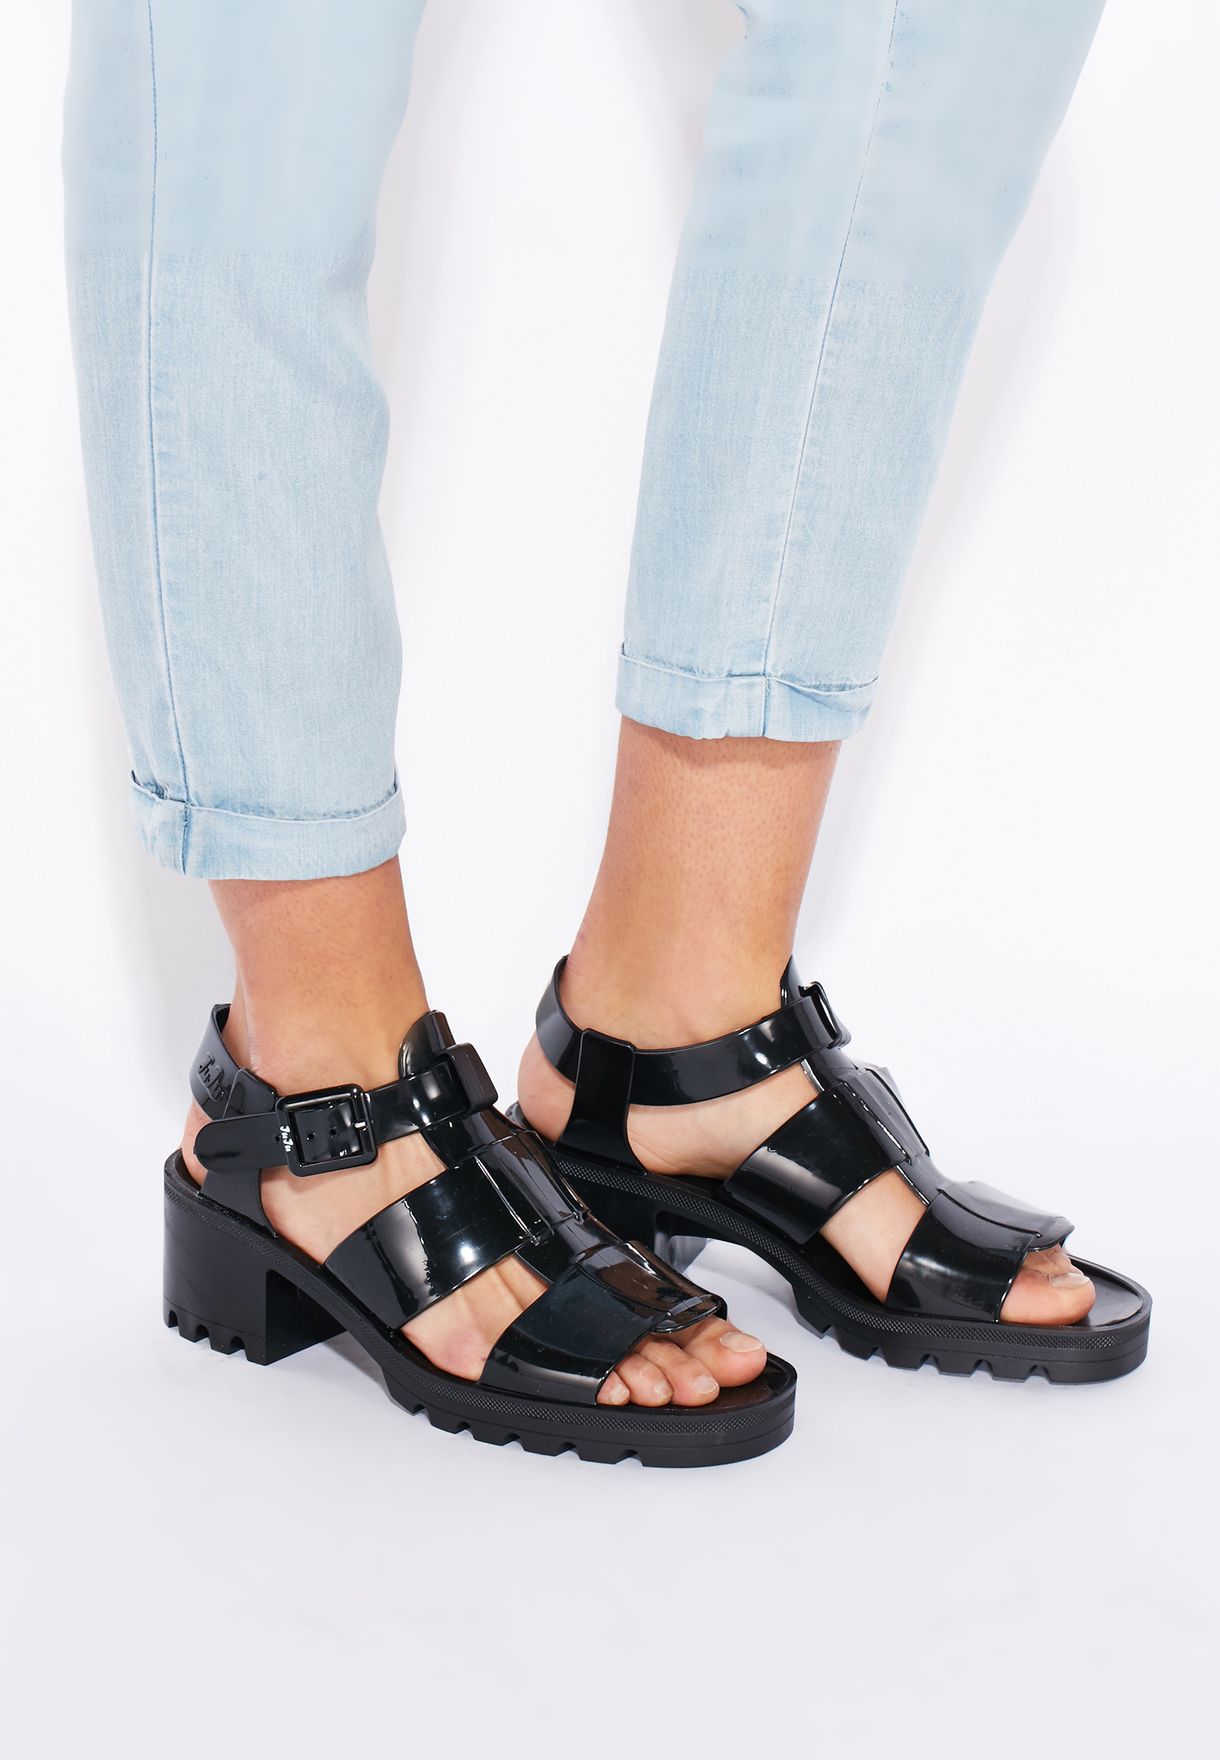 juju jelly shoes online